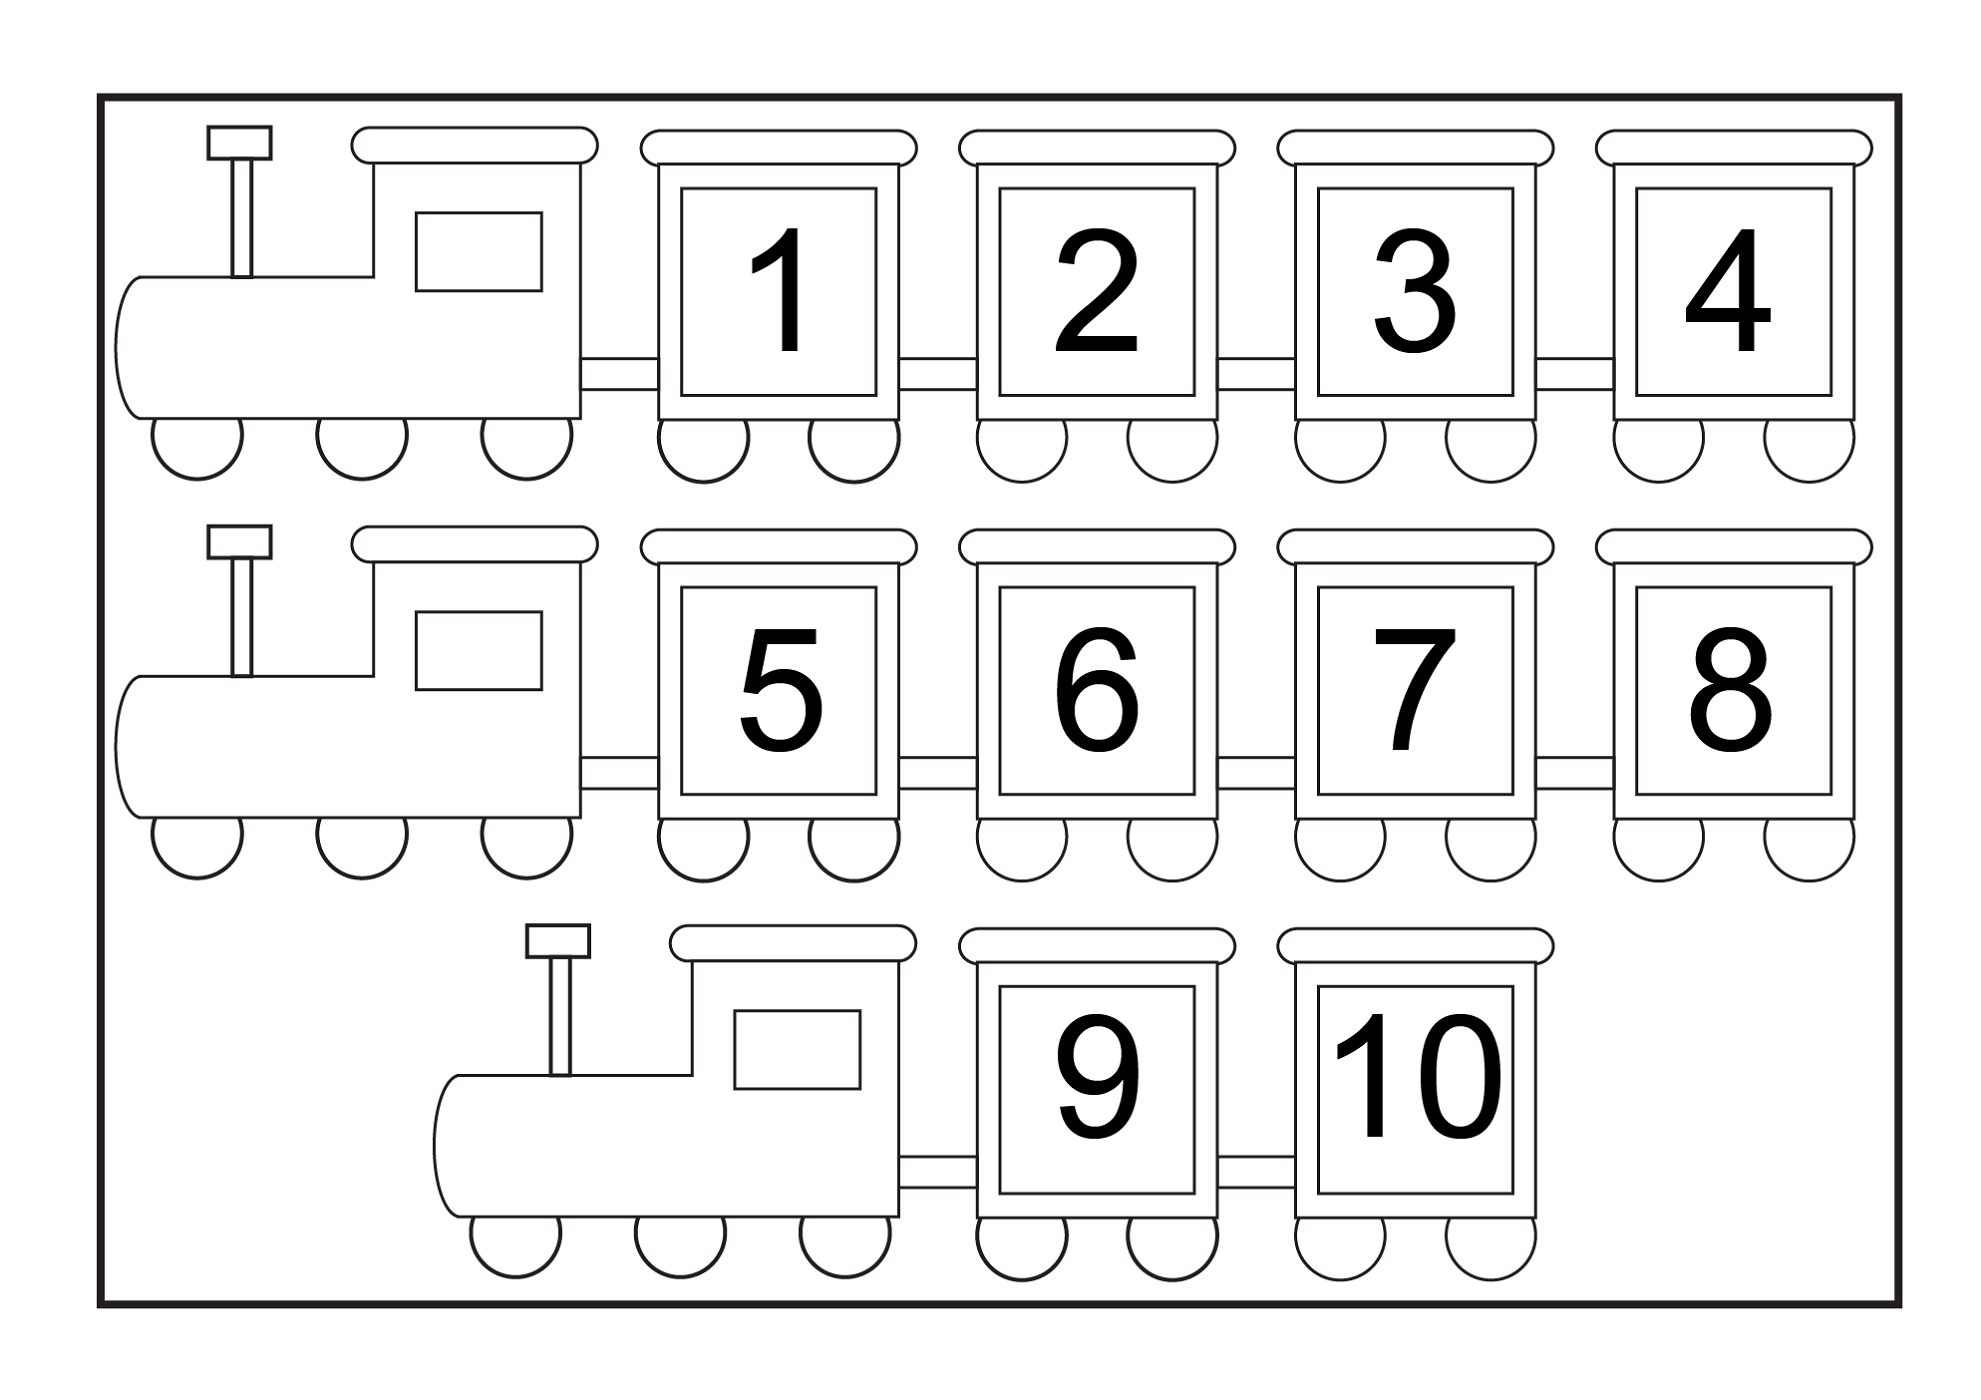 number-tracing-1-10-worksheet-free-printable-printable-number-charts-1-10-activity-shelter